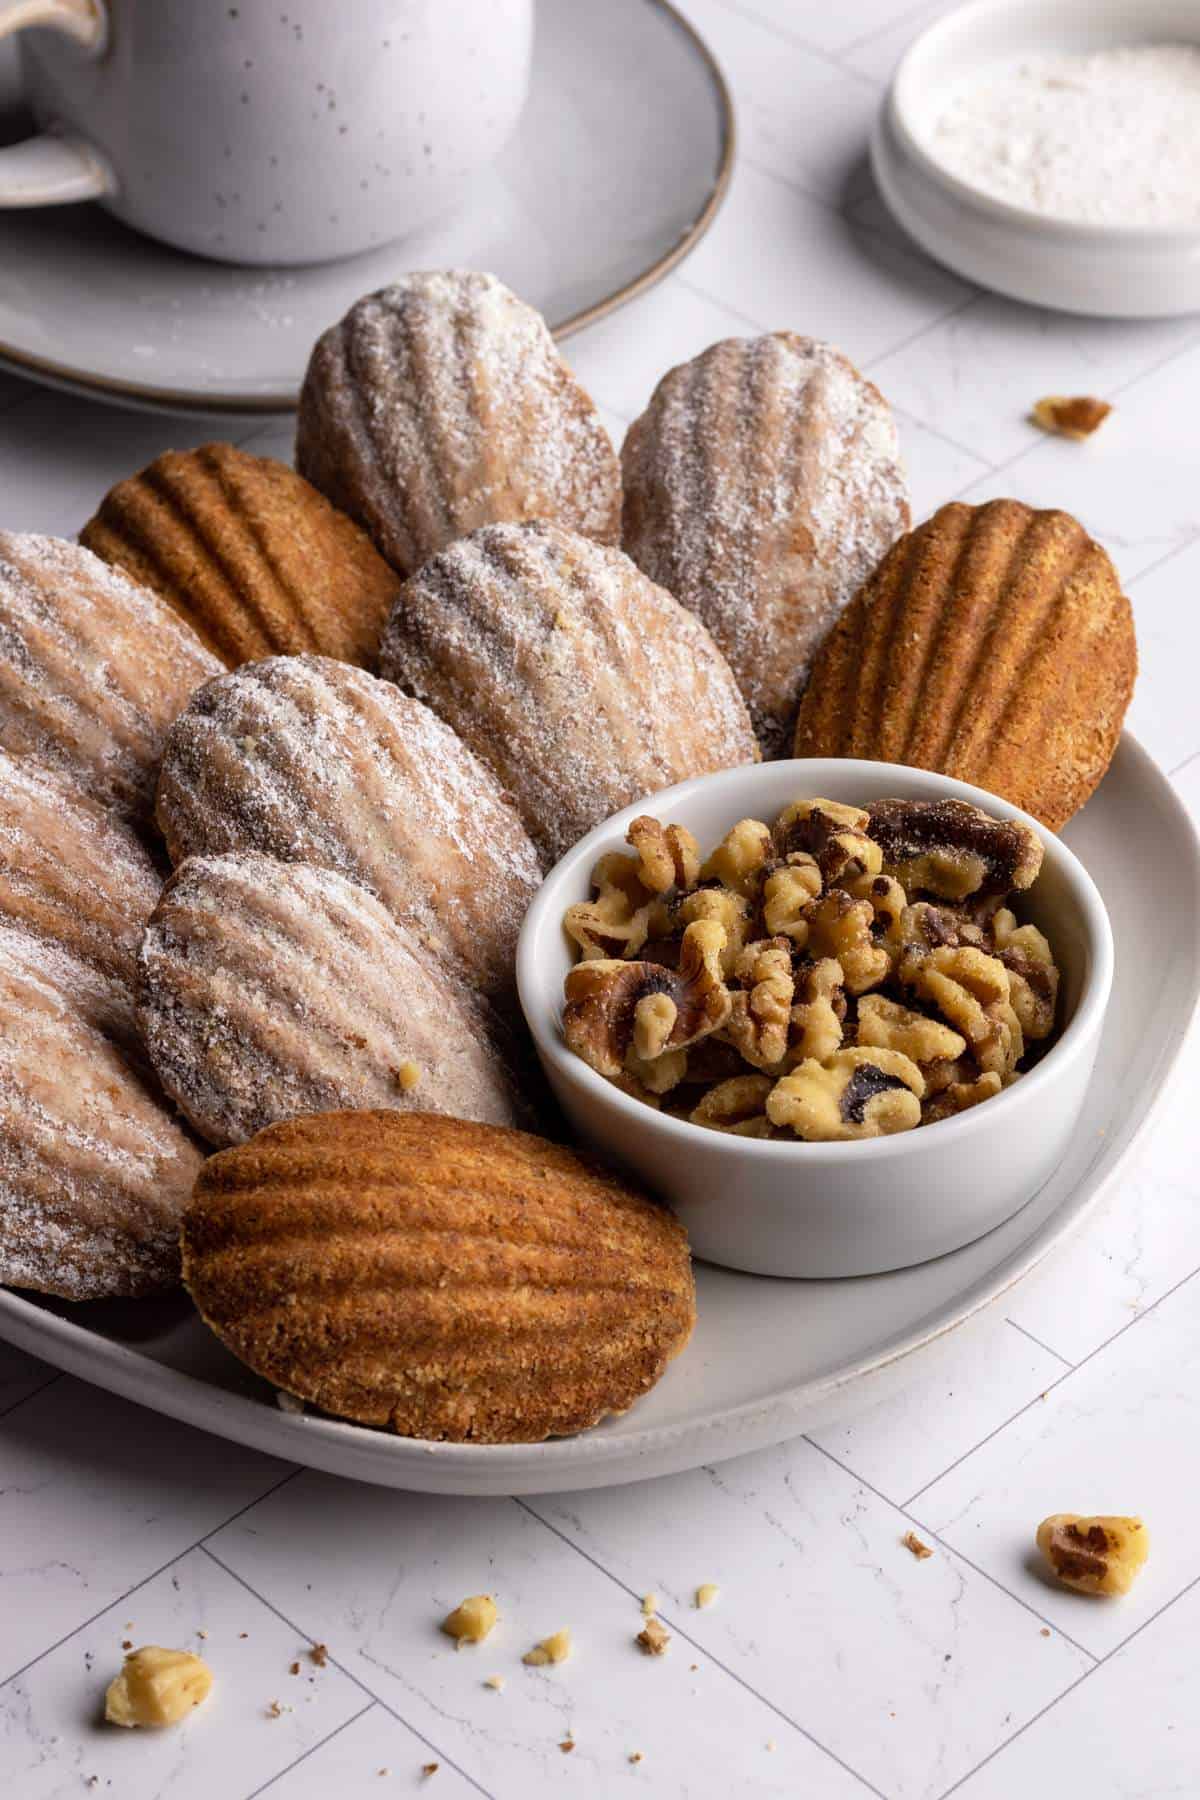 Walnut cookies on a plate.